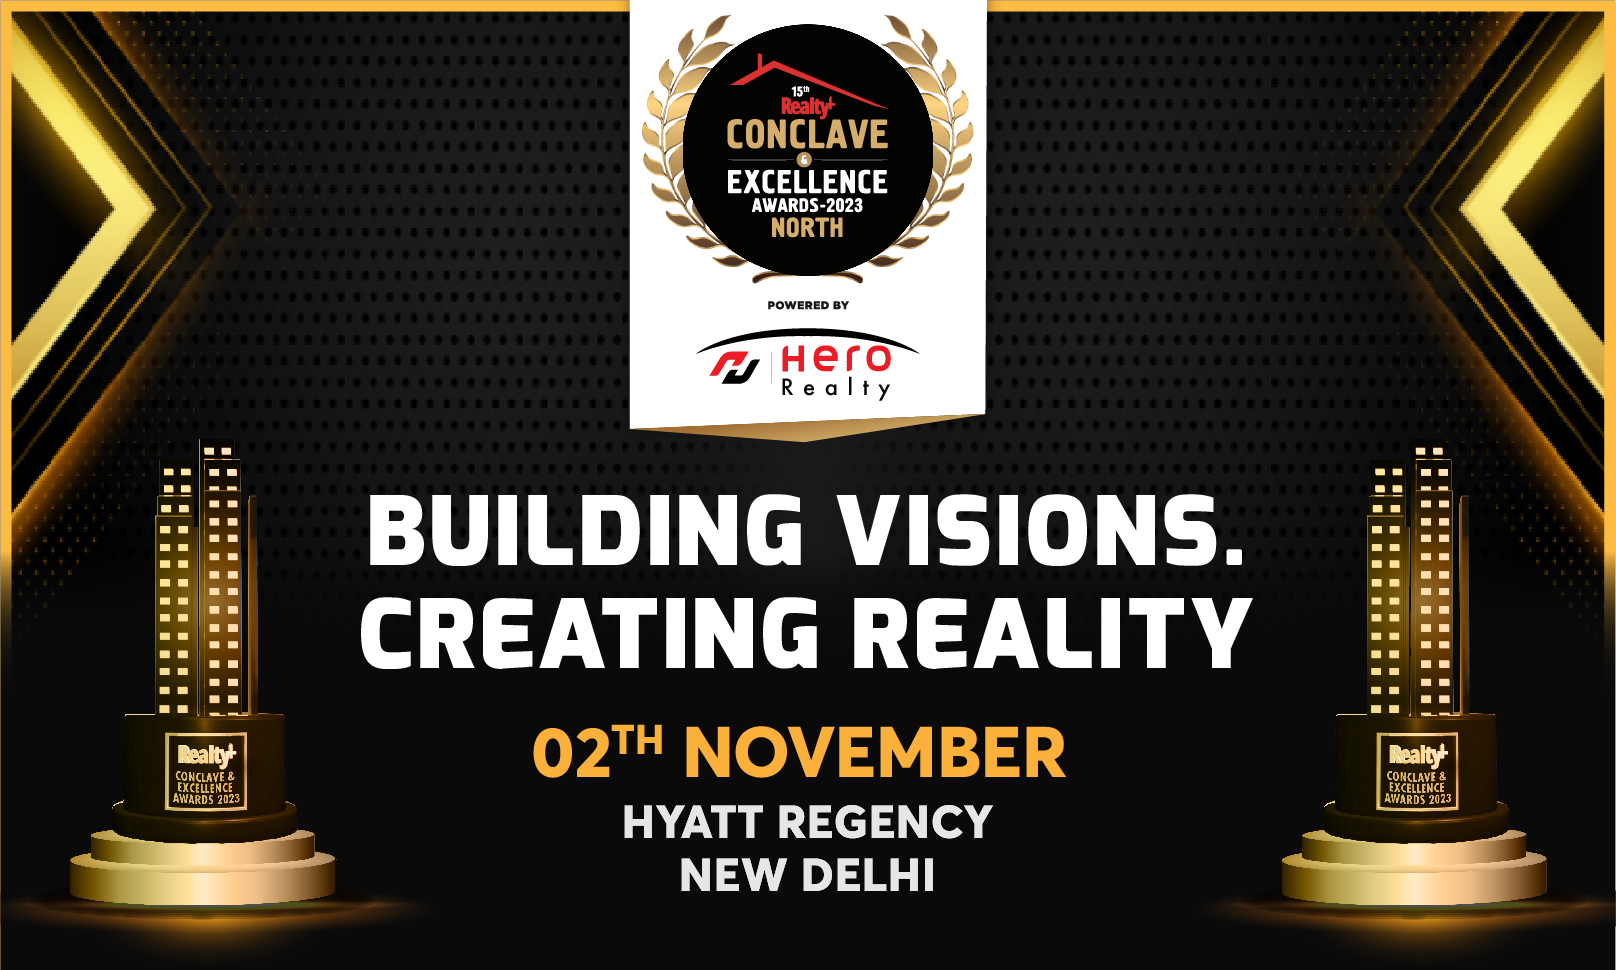 Coming Soon! The Biggest Congregation of North India’s Real Estate Leaders